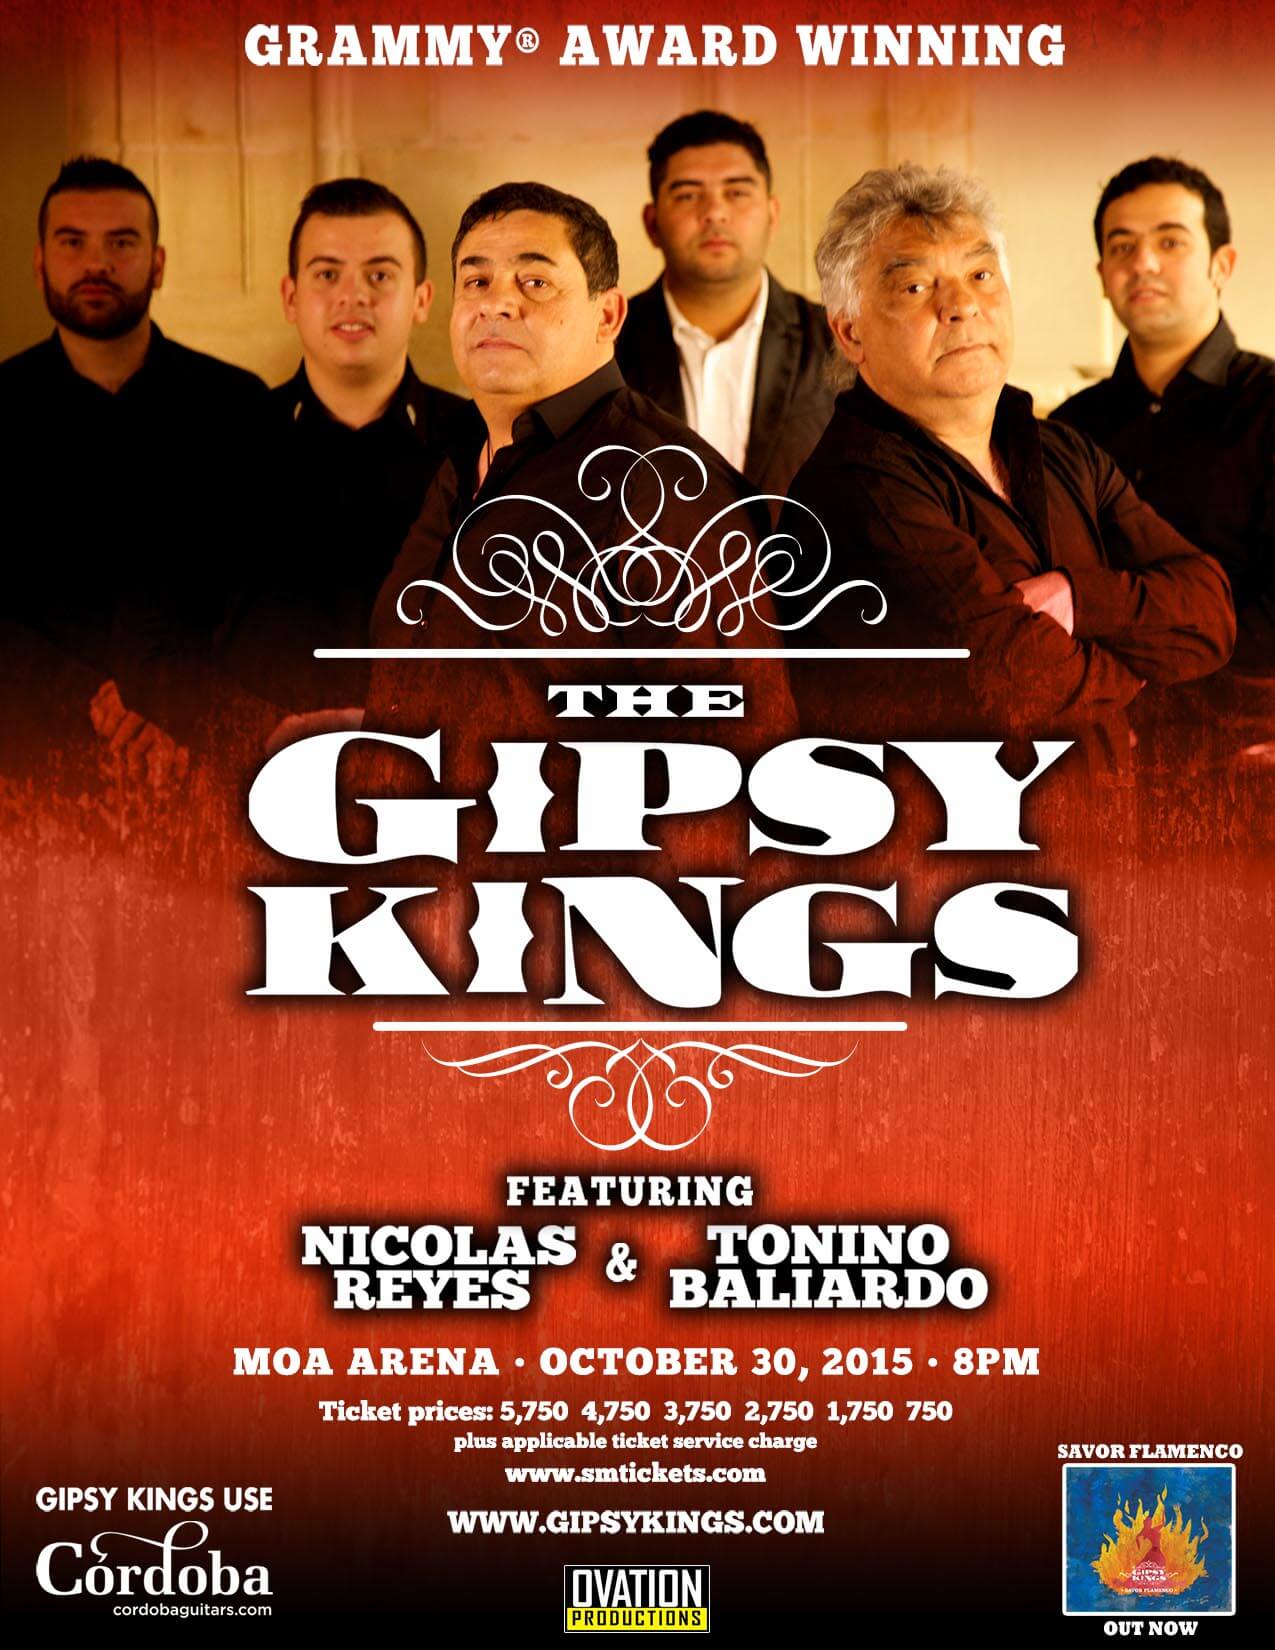 Get Ready to Dance, The Gipsy Kings is Coming to Manila for a One-Night Concert on October 30